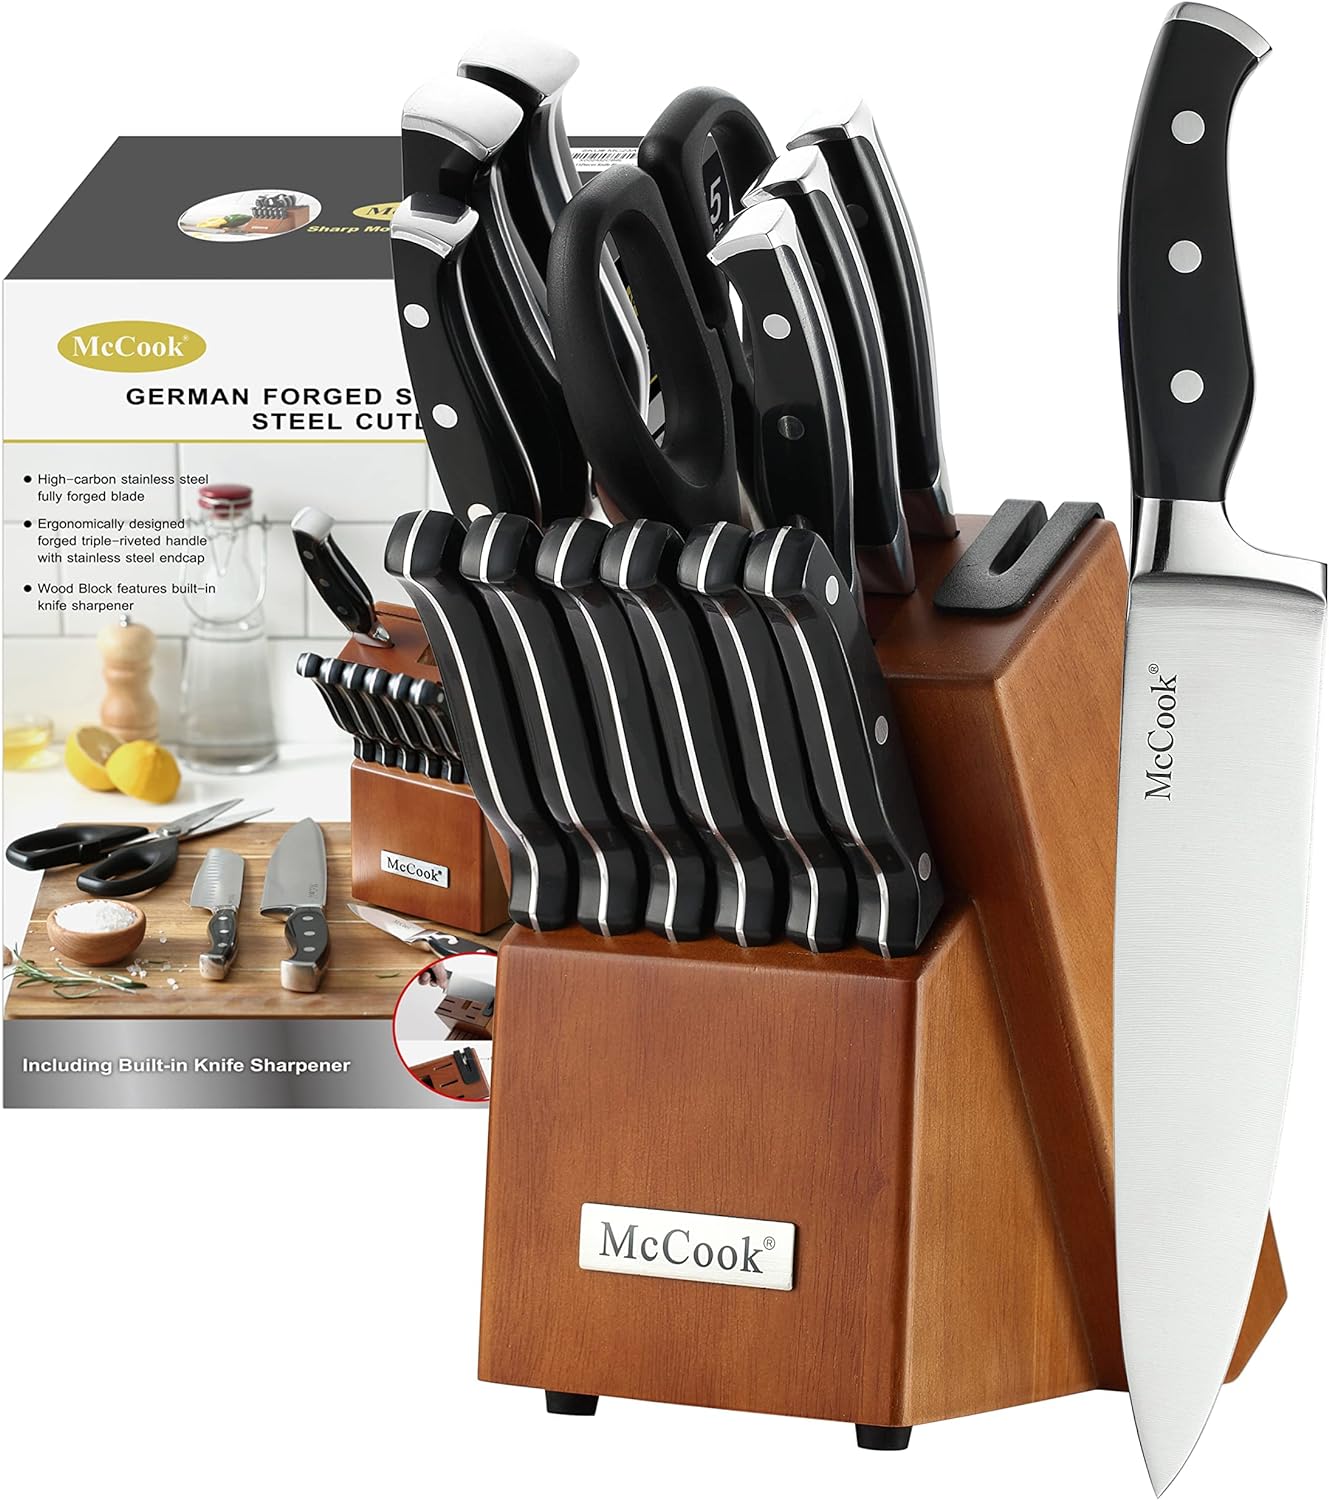 Astercook Knife Set, 15-PC German Stainless Steel Kitchen Knives